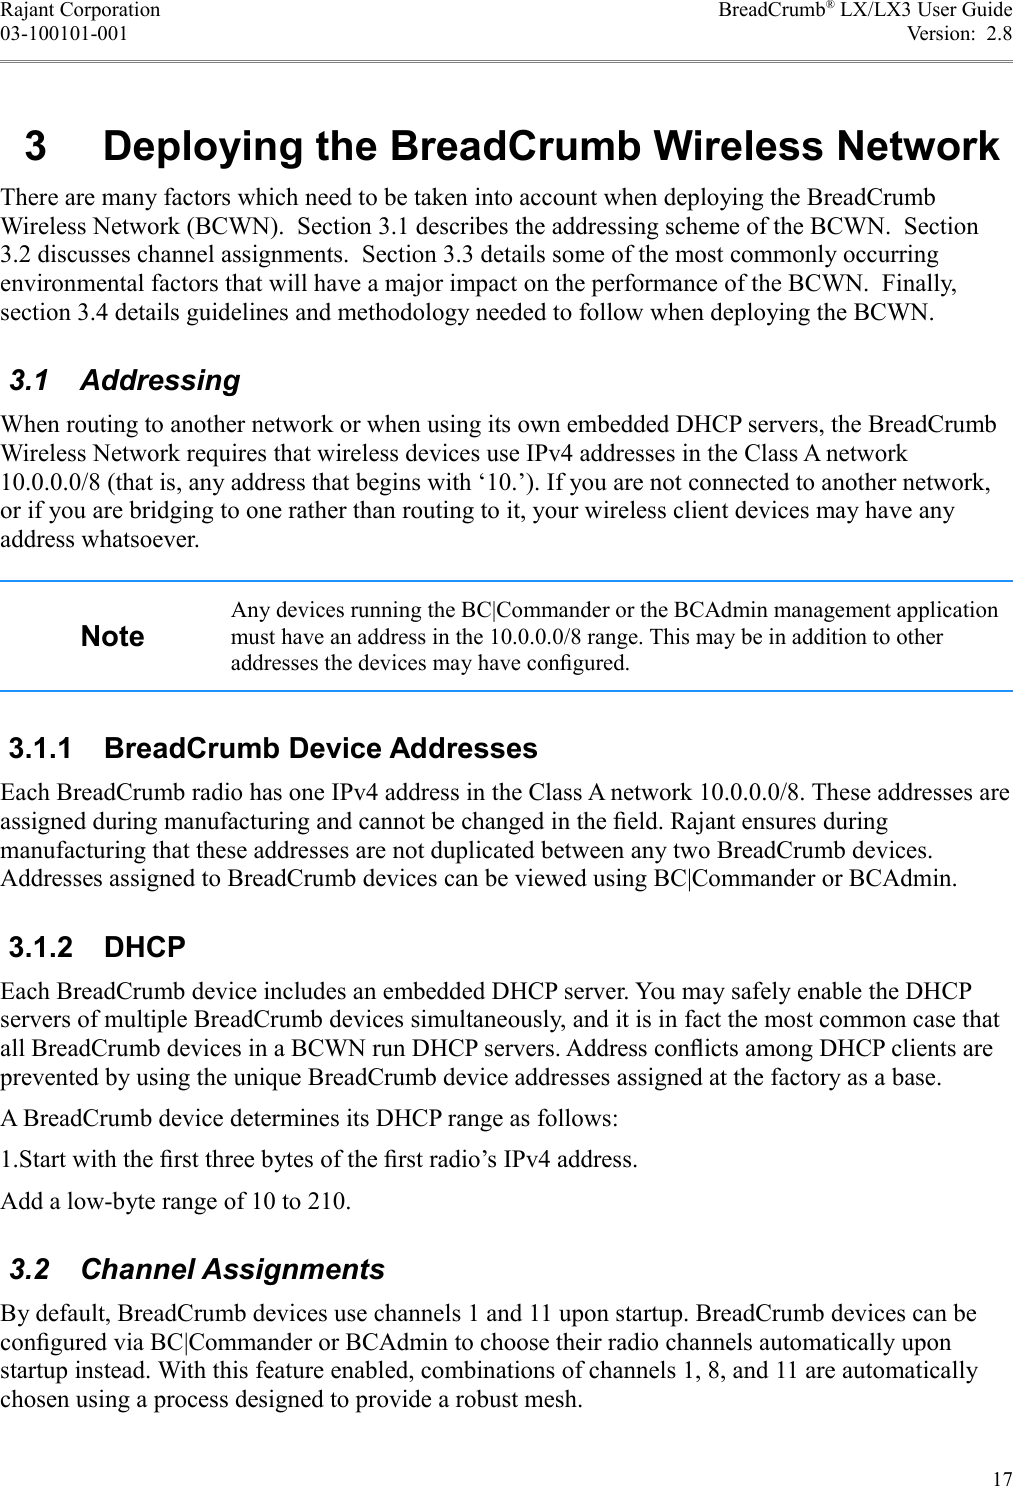 Rajant Corporation BreadCrumb® LX/LX3 User Guide03-100101-001 Version:  2.8 3  Deploying the BreadCrumb Wireless NetworkThere are many factors which need to be taken into account when deploying the BreadCrumb Wireless Network (BCWN).  Section 3.1 describes the addressing scheme of the BCWN.  Section 3.2 discusses channel assignments.  Section 3.3 details some of the most commonly occurring environmental factors that will have a major impact on the performance of the BCWN.  Finally, section 3.4 details guidelines and methodology needed to follow when deploying the BCWN. 3.1  AddressingWhen routing to another network or when using its own embedded DHCP servers, the BreadCrumb Wireless Network requires that wireless devices use IPv4 addresses in the Class A network 10.0.0.0/8 (that is, any address that begins with ‘10.’). If you are not connected to another network, or if you are bridging to one rather than routing to it, your wireless client devices may have any address whatsoever.NoteAny devices running the BC|Commander or the BCAdmin management application must have an address in the 10.0.0.0/8 range. This may be in addition to other addresses the devices may have conﬁgured. 3.1.1  BreadCrumb Device AddressesEach BreadCrumb radio has one IPv4 address in the Class A network 10.0.0.0/8. These addresses are assigned during manufacturing and cannot be changed in the ﬁeld. Rajant ensures during manufacturing that these addresses are not duplicated between any two BreadCrumb devices. Addresses assigned to BreadCrumb devices can be viewed using BC|Commander or BCAdmin. 3.1.2  DHCPEach BreadCrumb device includes an embedded DHCP server. You may safely enable the DHCP servers of multiple BreadCrumb devices simultaneously, and it is in fact the most common case that all BreadCrumb devices in a BCWN run DHCP servers. Address conﬂicts among DHCP clients are prevented by using the unique BreadCrumb device addresses assigned at the factory as a base.A BreadCrumb device determines its DHCP range as follows:1.Start with the ﬁrst three bytes of the ﬁrst radio’s IPv4 address.Add a low-byte range of 10 to 210. 3.2  Channel AssignmentsBy default, BreadCrumb devices use channels 1 and 11 upon startup. BreadCrumb devices can be conﬁgured via BC|Commander or BCAdmin to choose their radio channels automatically upon startup instead. With this feature enabled, combinations of channels 1, 8, and 11 are automatically chosen using a process designed to provide a robust mesh.17